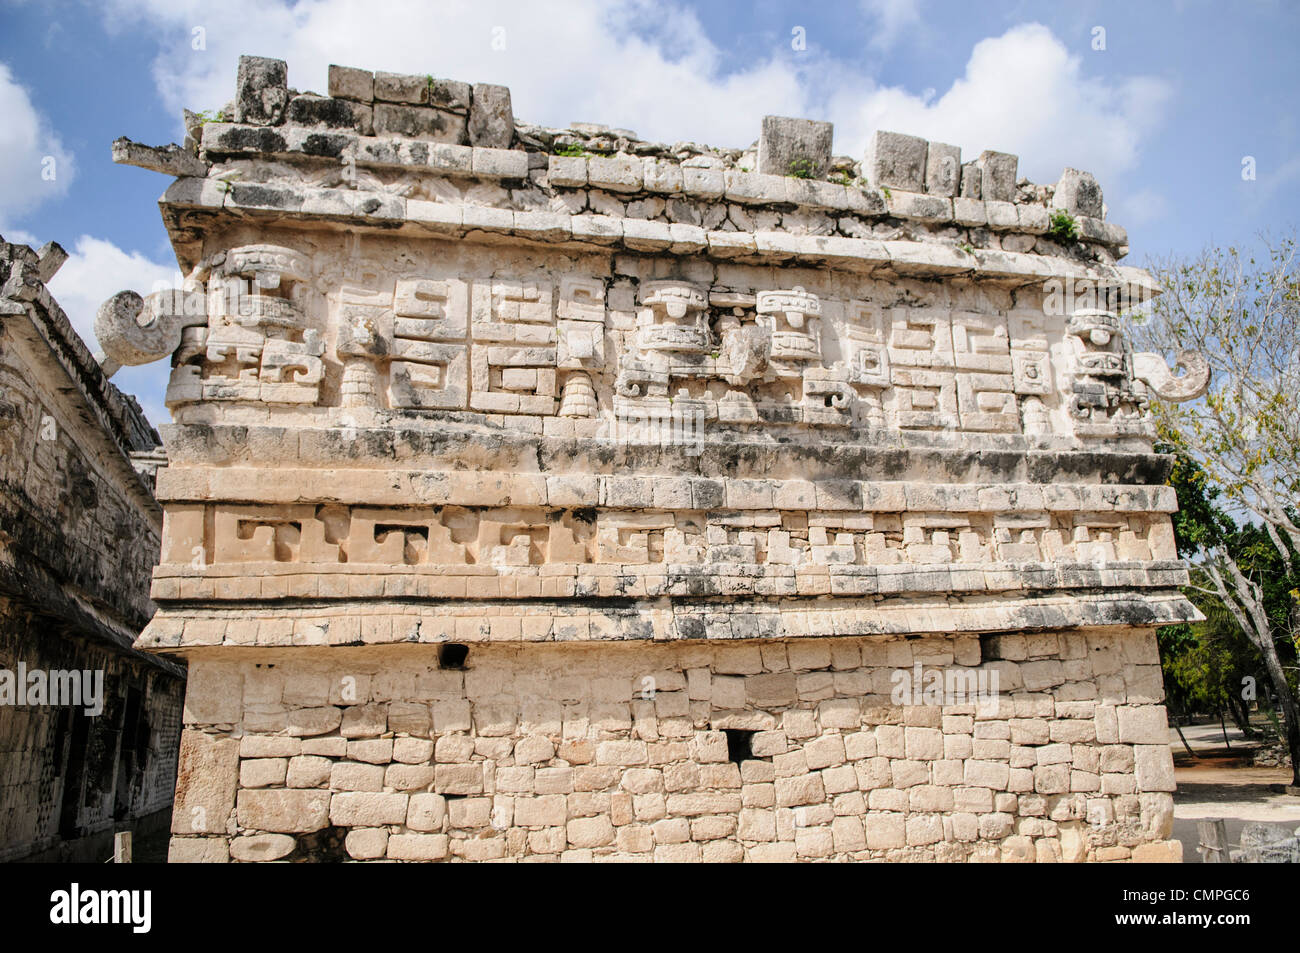 CHICHEN ITZA, Mexico - Ornately decorated building at Chichen Itza Mayan ruins in Mexico. This is the side of 'La Iglesia' in the Las Monjas complex of buildings on the site. Stock Photo